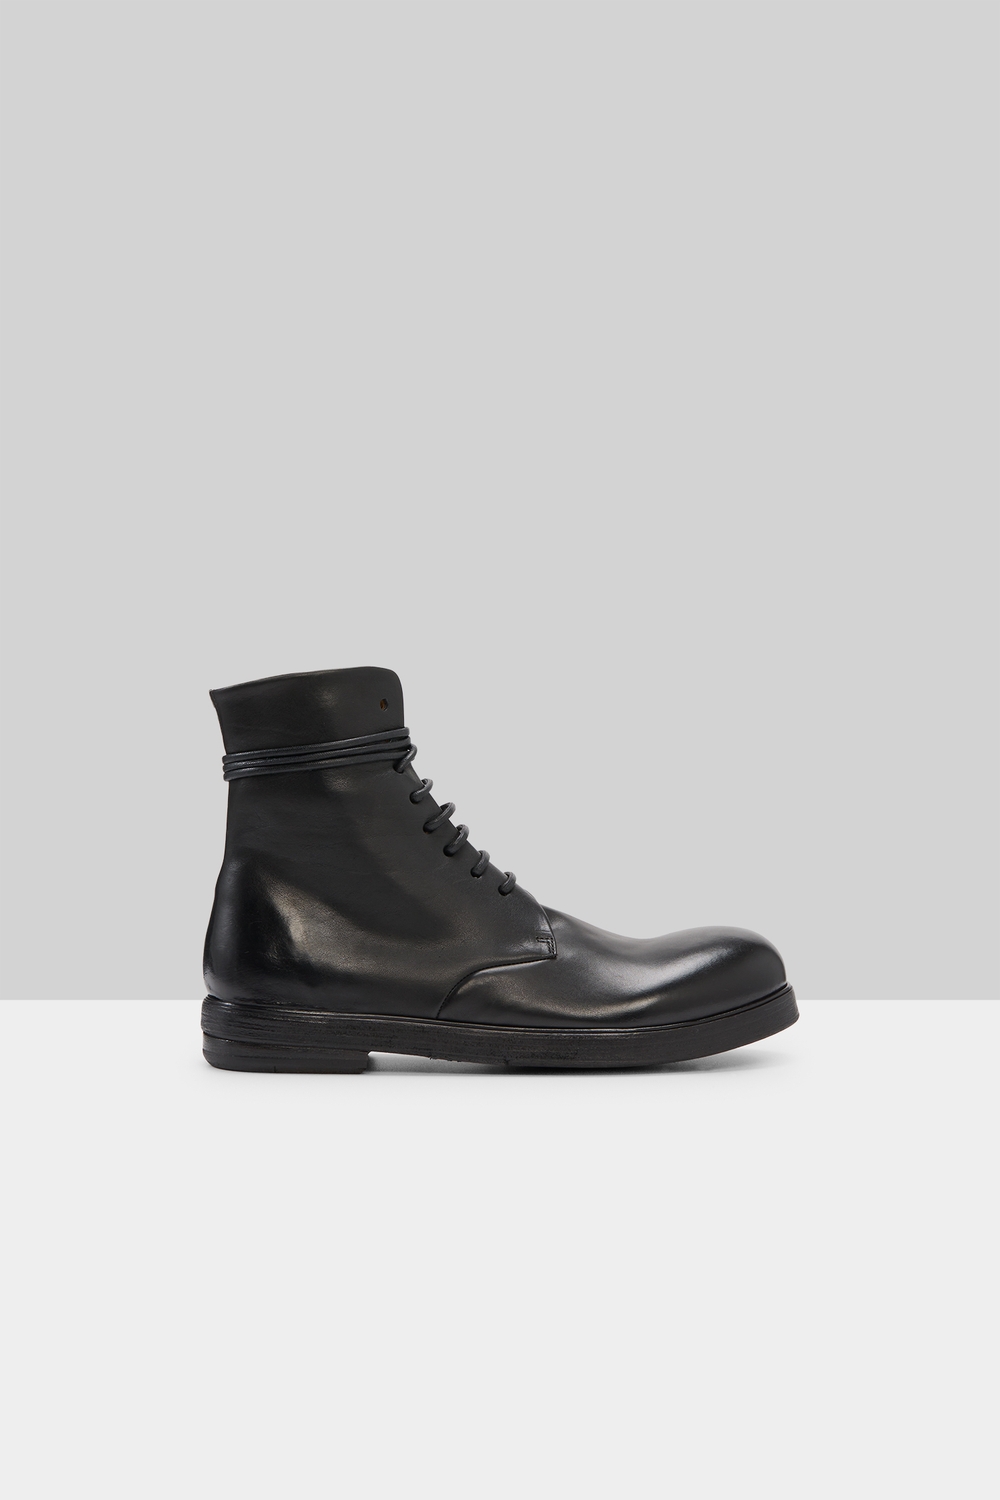 Zucca Zeppa Lace Up Ankle Boot Black